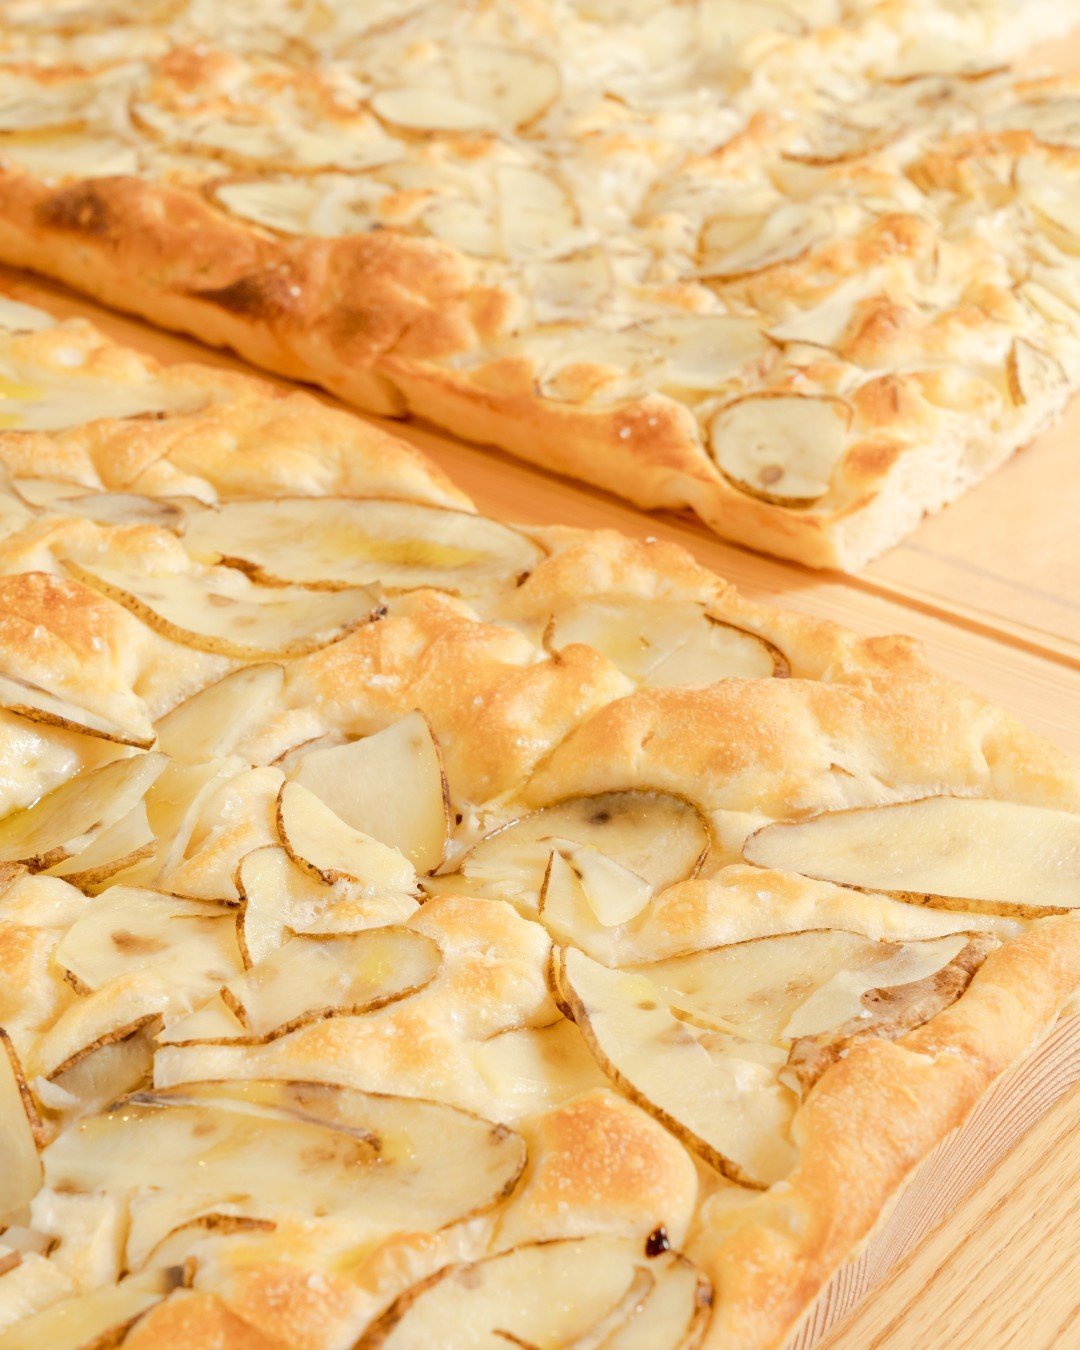 Delight in the simple pleasures of our homemade Focaccia, made daily. Perfect alone or paired with your favorite dishes.